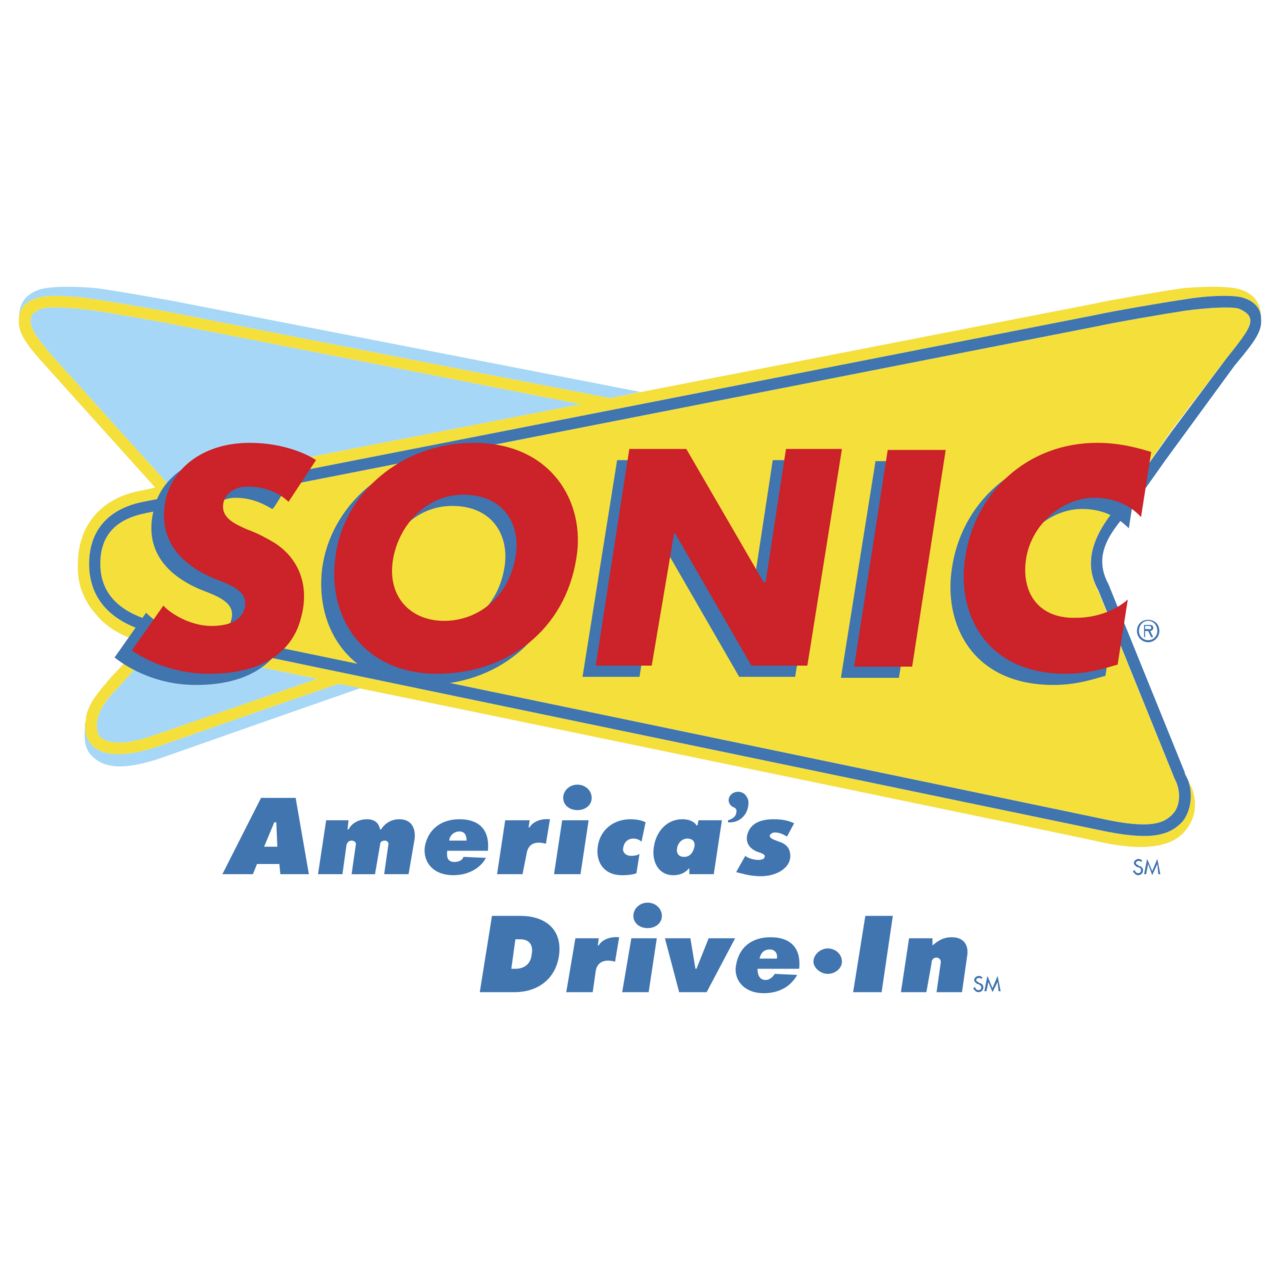 Download Sonic Logo PNG and Vector (PDF, SVG, Ai, EPS) Free